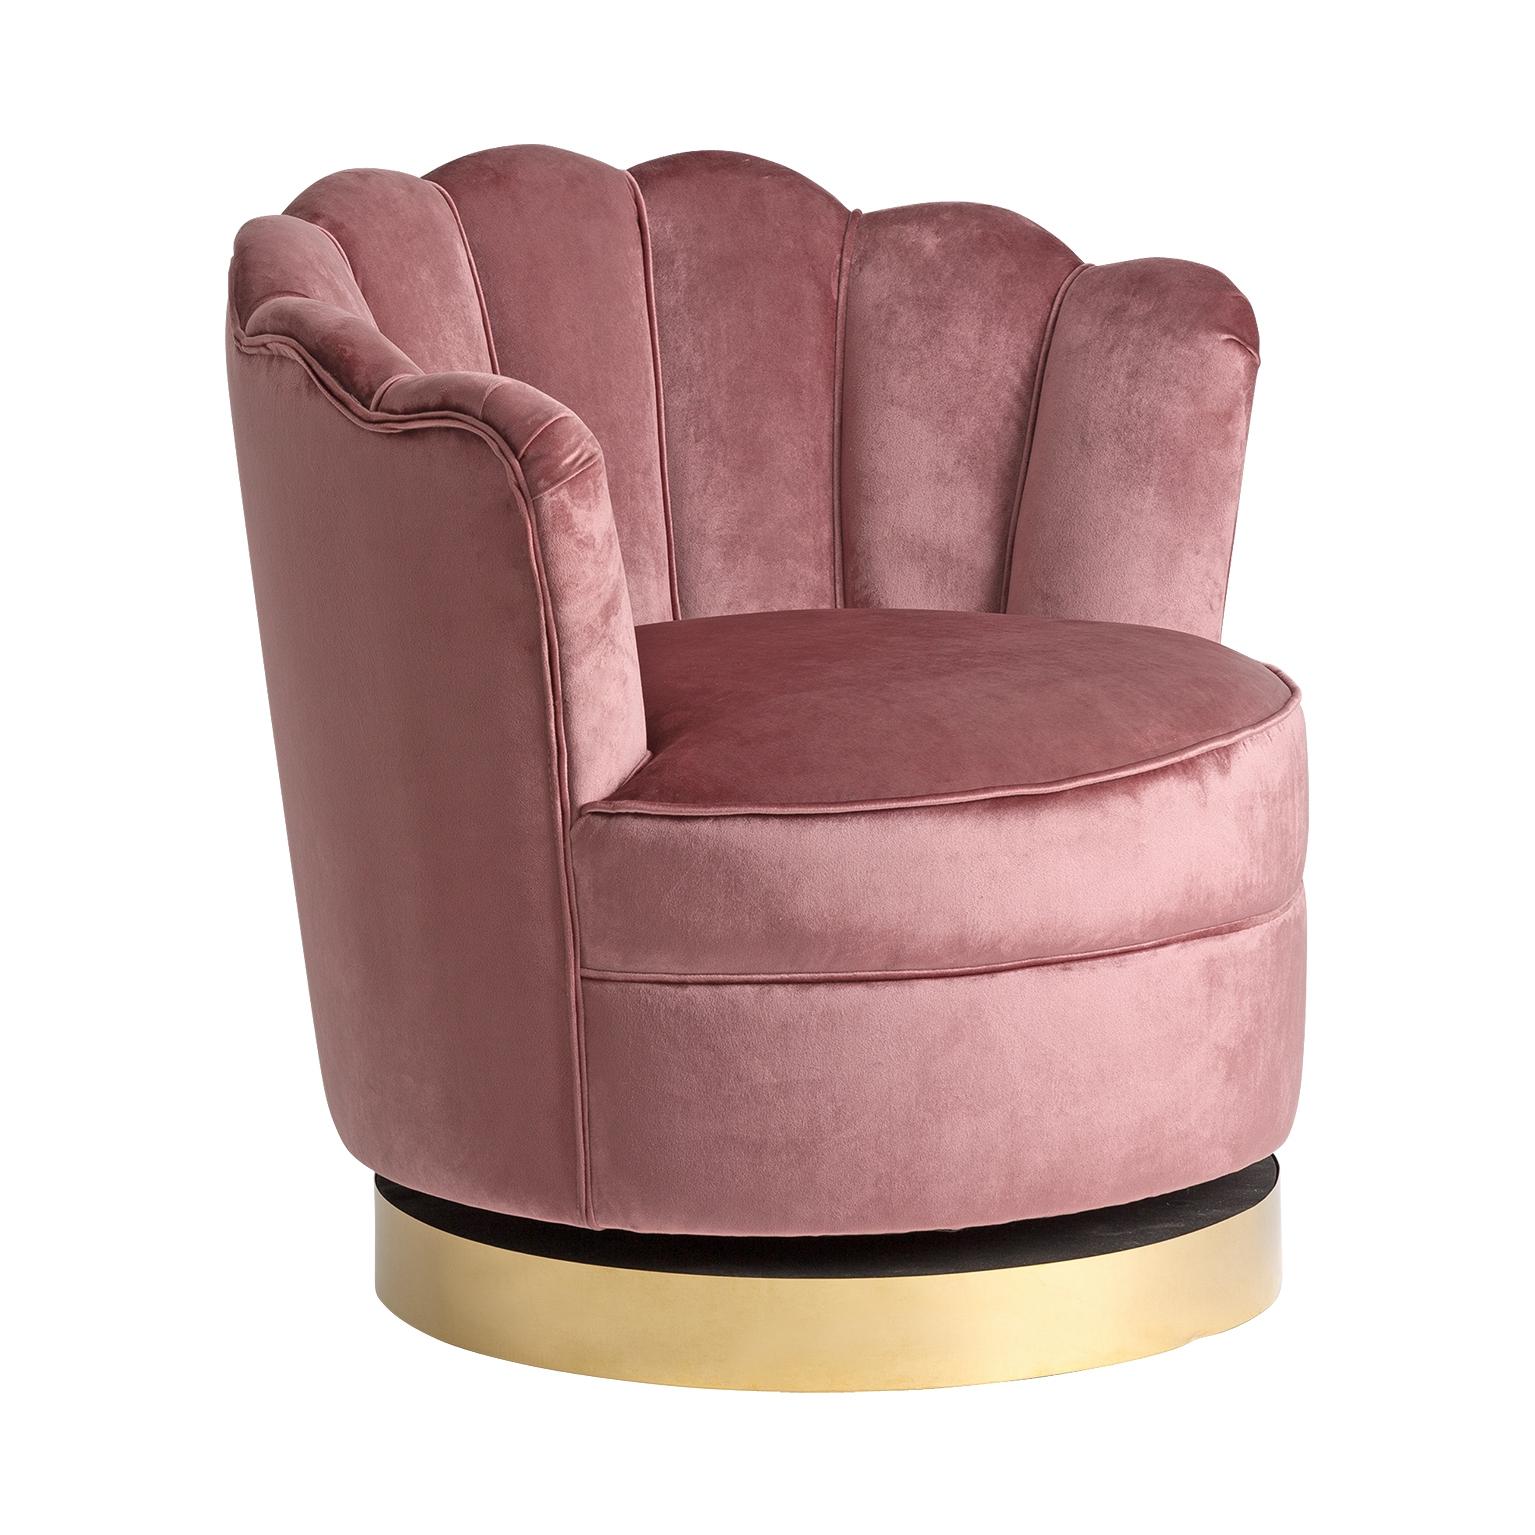 Golden round foot and powdery pink velvet swivel and lounge comfy armchair in Art Deco style.